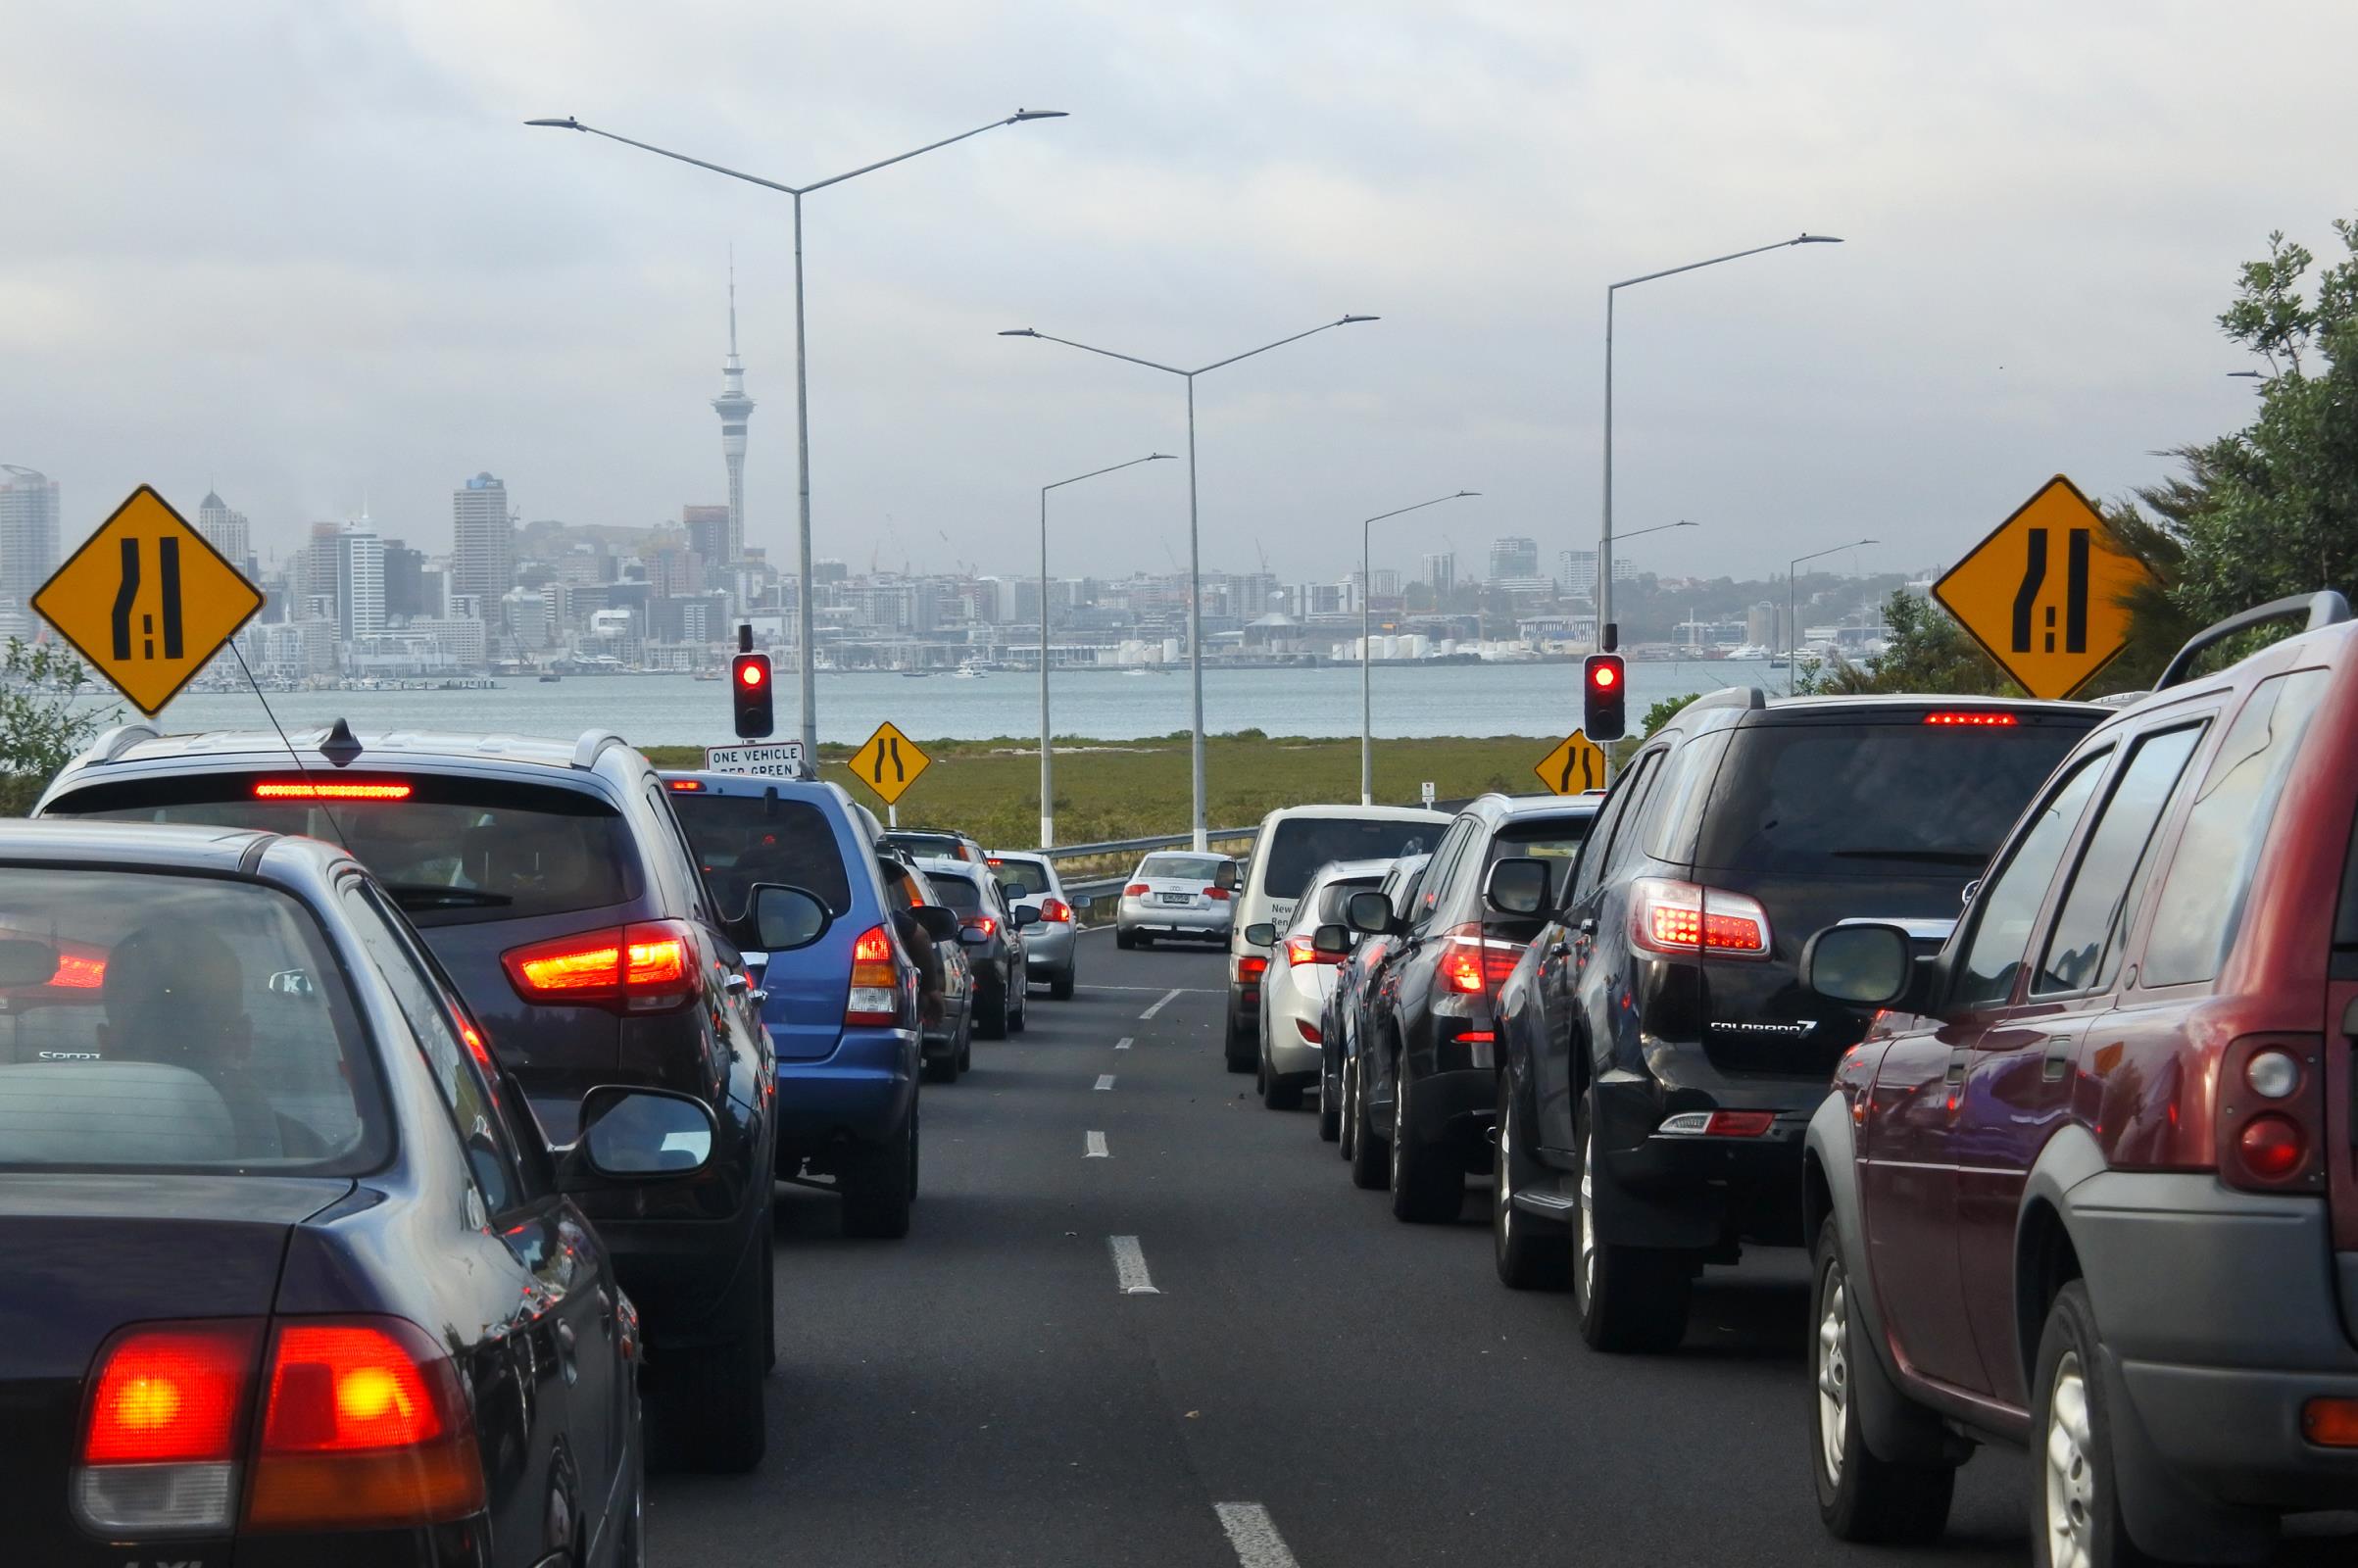 traffic jam on Auckland motorway with city in background